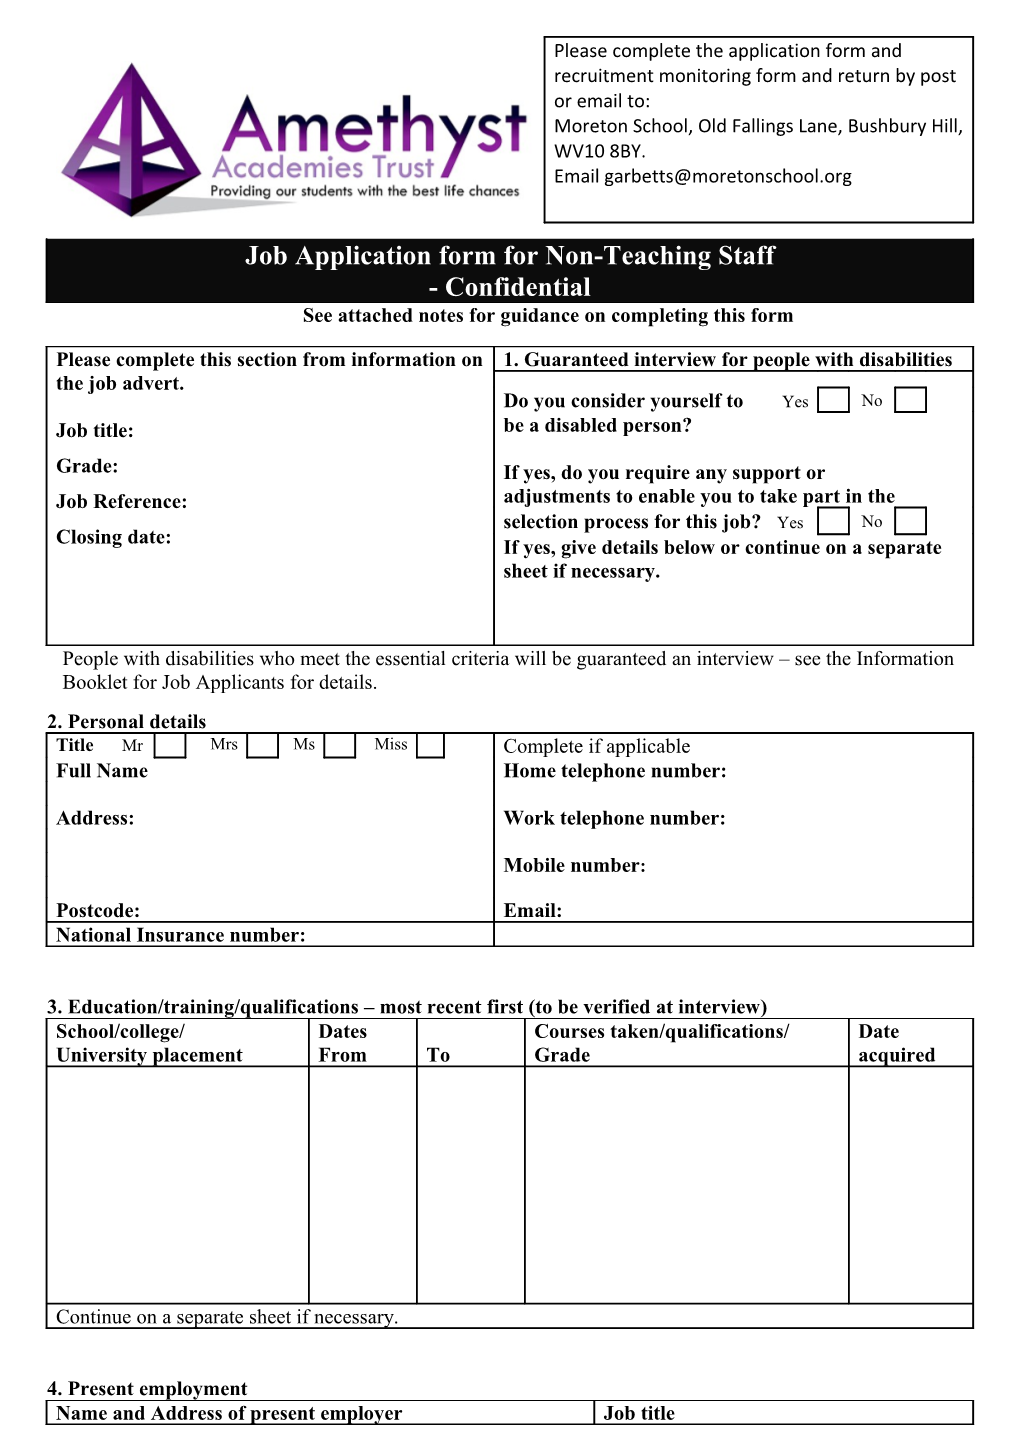 See Attached Notes for Guidance on Completing This Form